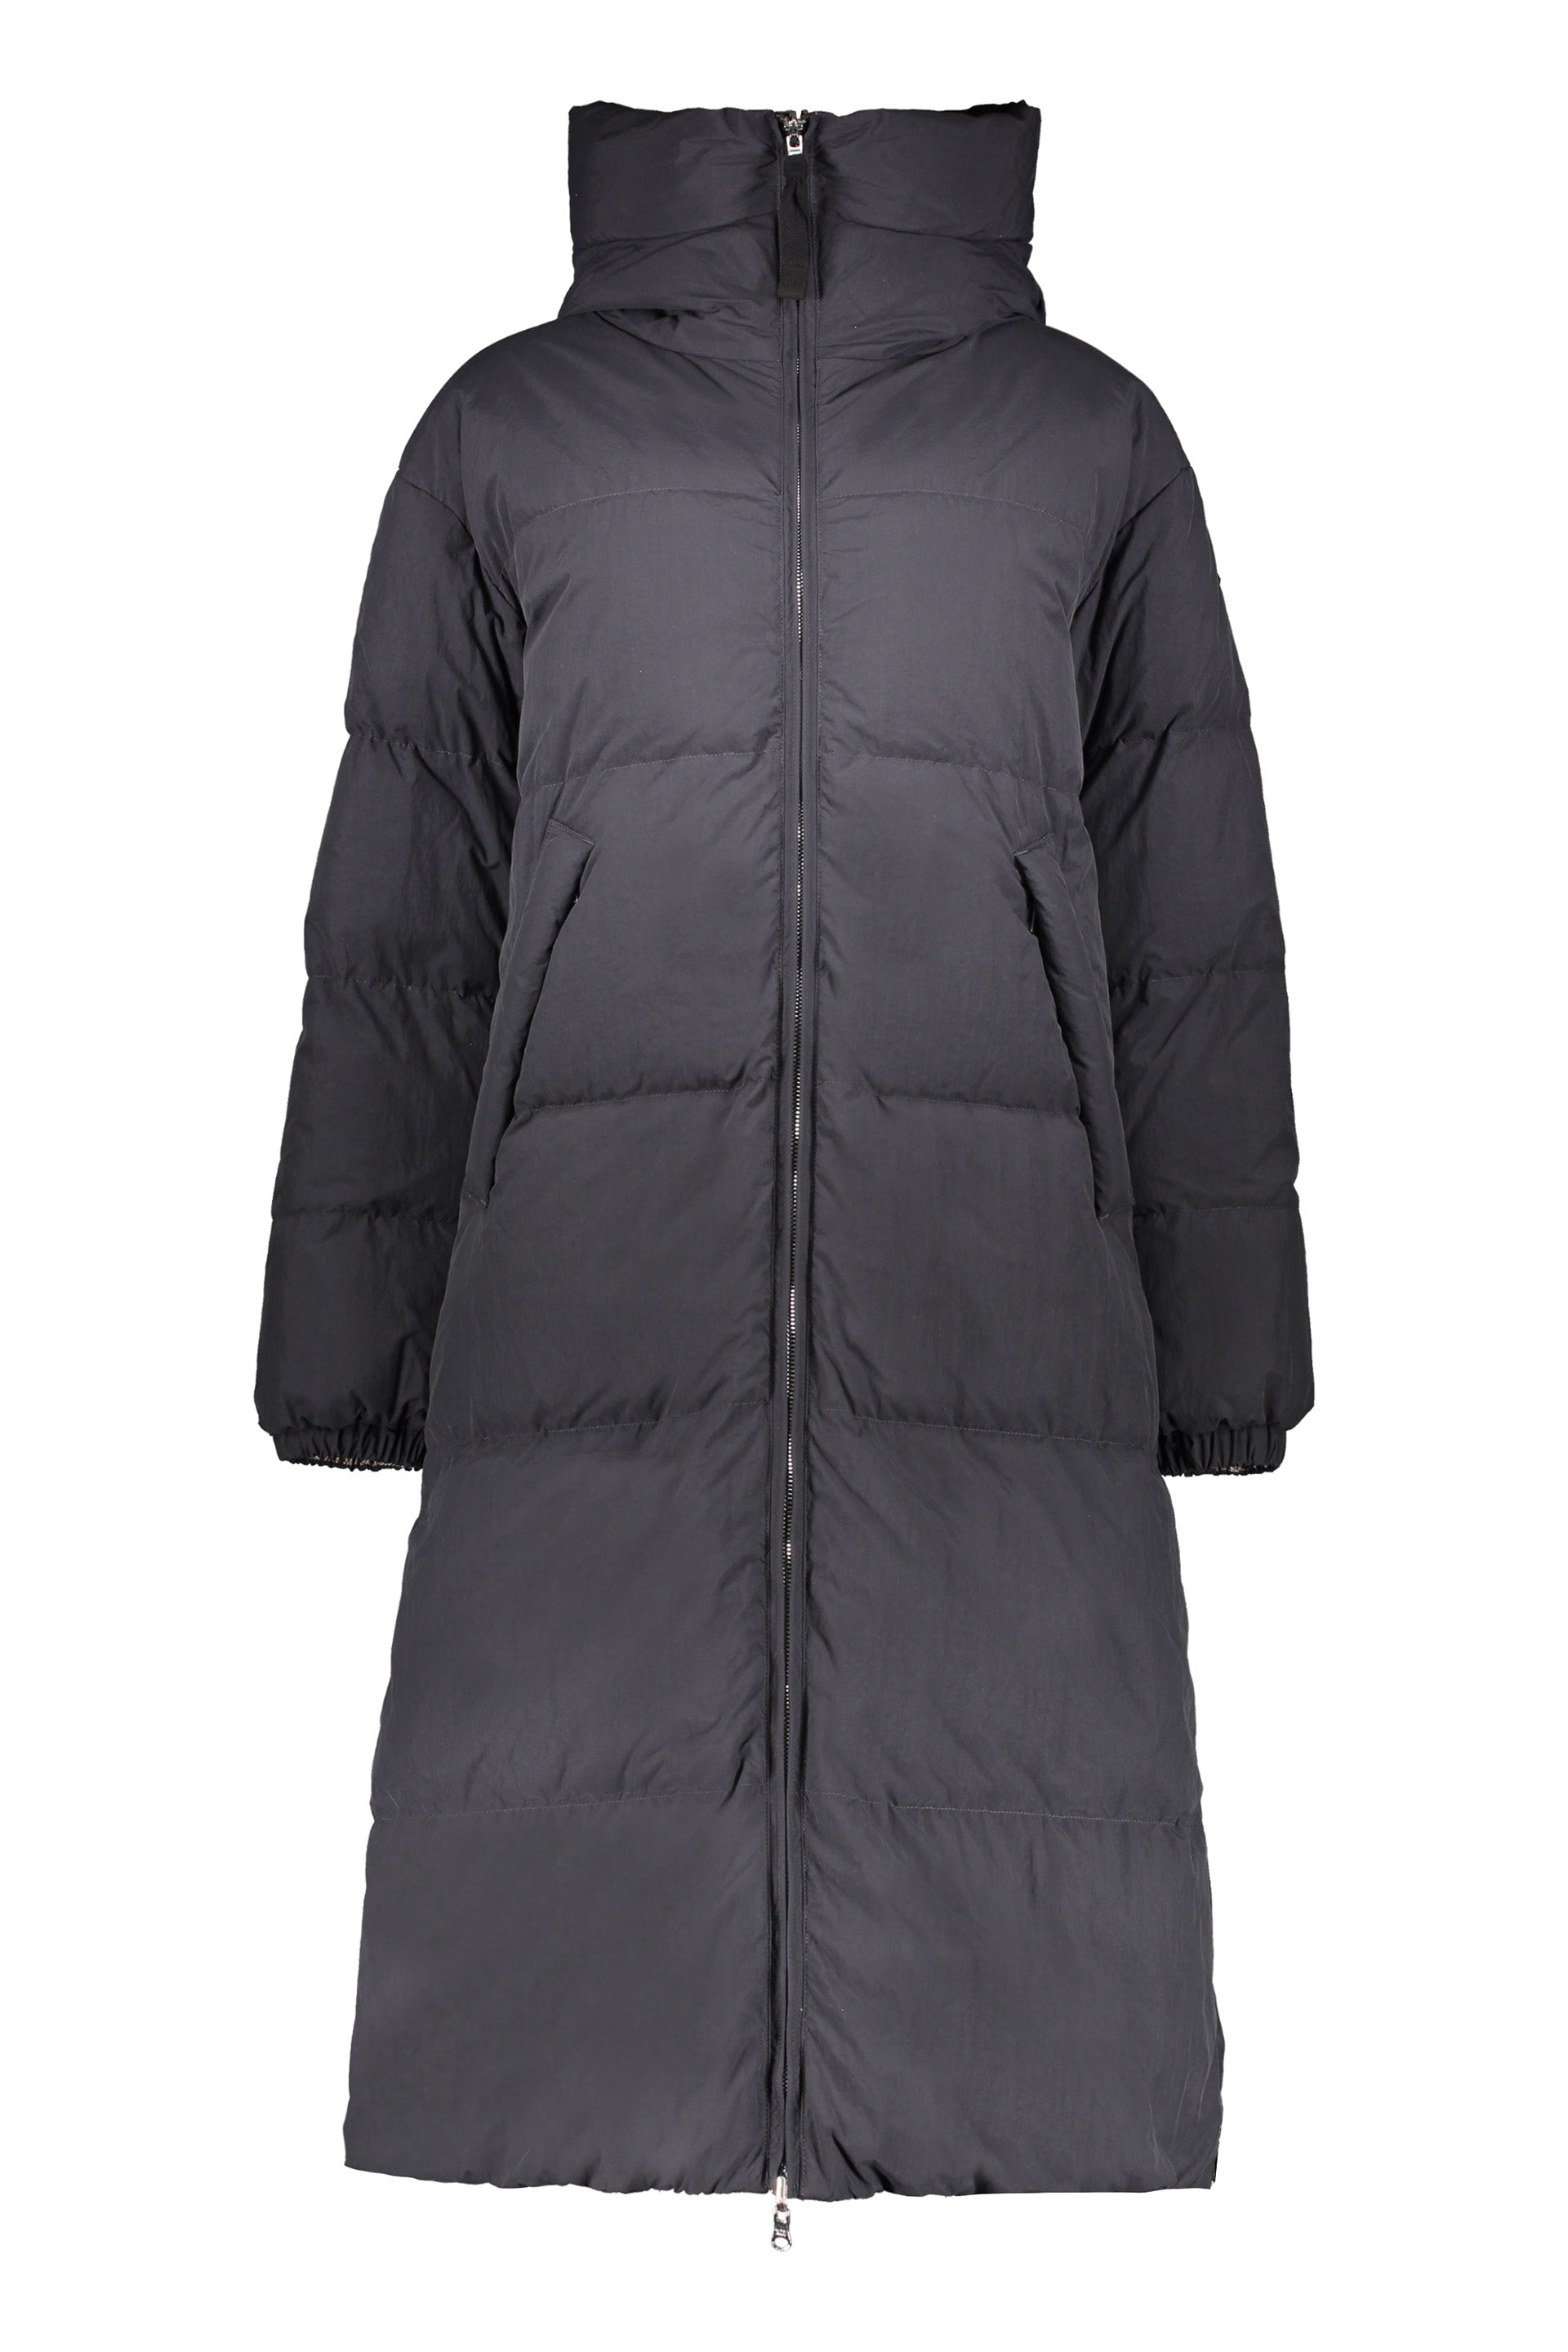 Parajumpers-OUTLET-SALE-Sleeping-Bag-long-hooded-down-jacket-Jacken-Mantel-M-ARCHIVE-COLLECTION.jpg